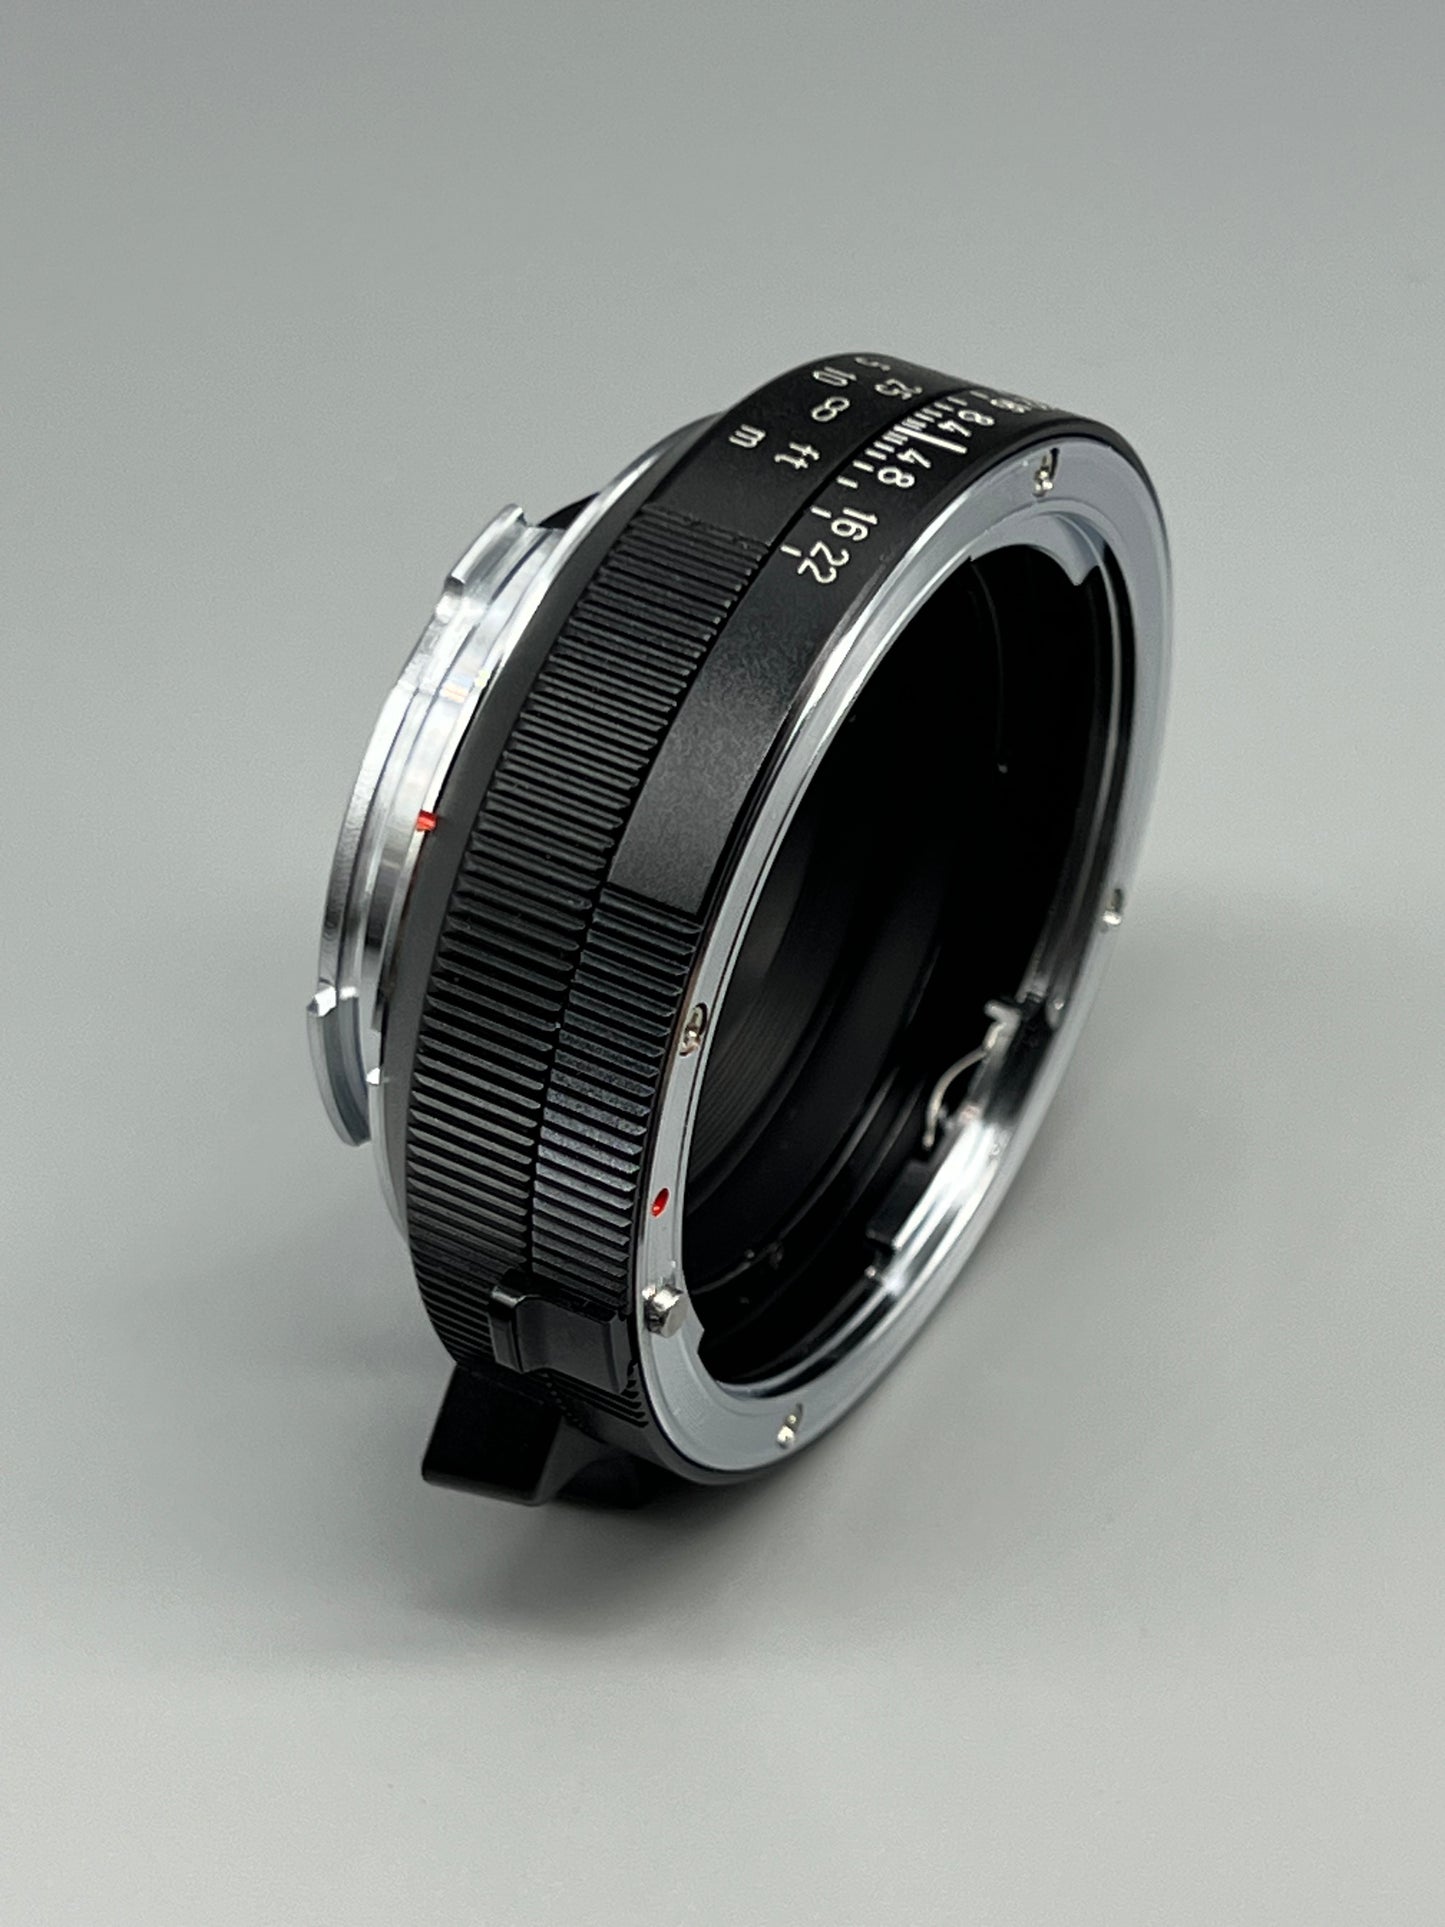 coupled R-LM（Version 2.0） R50 rangefinder-link adapter R mount lens to Leica M camera